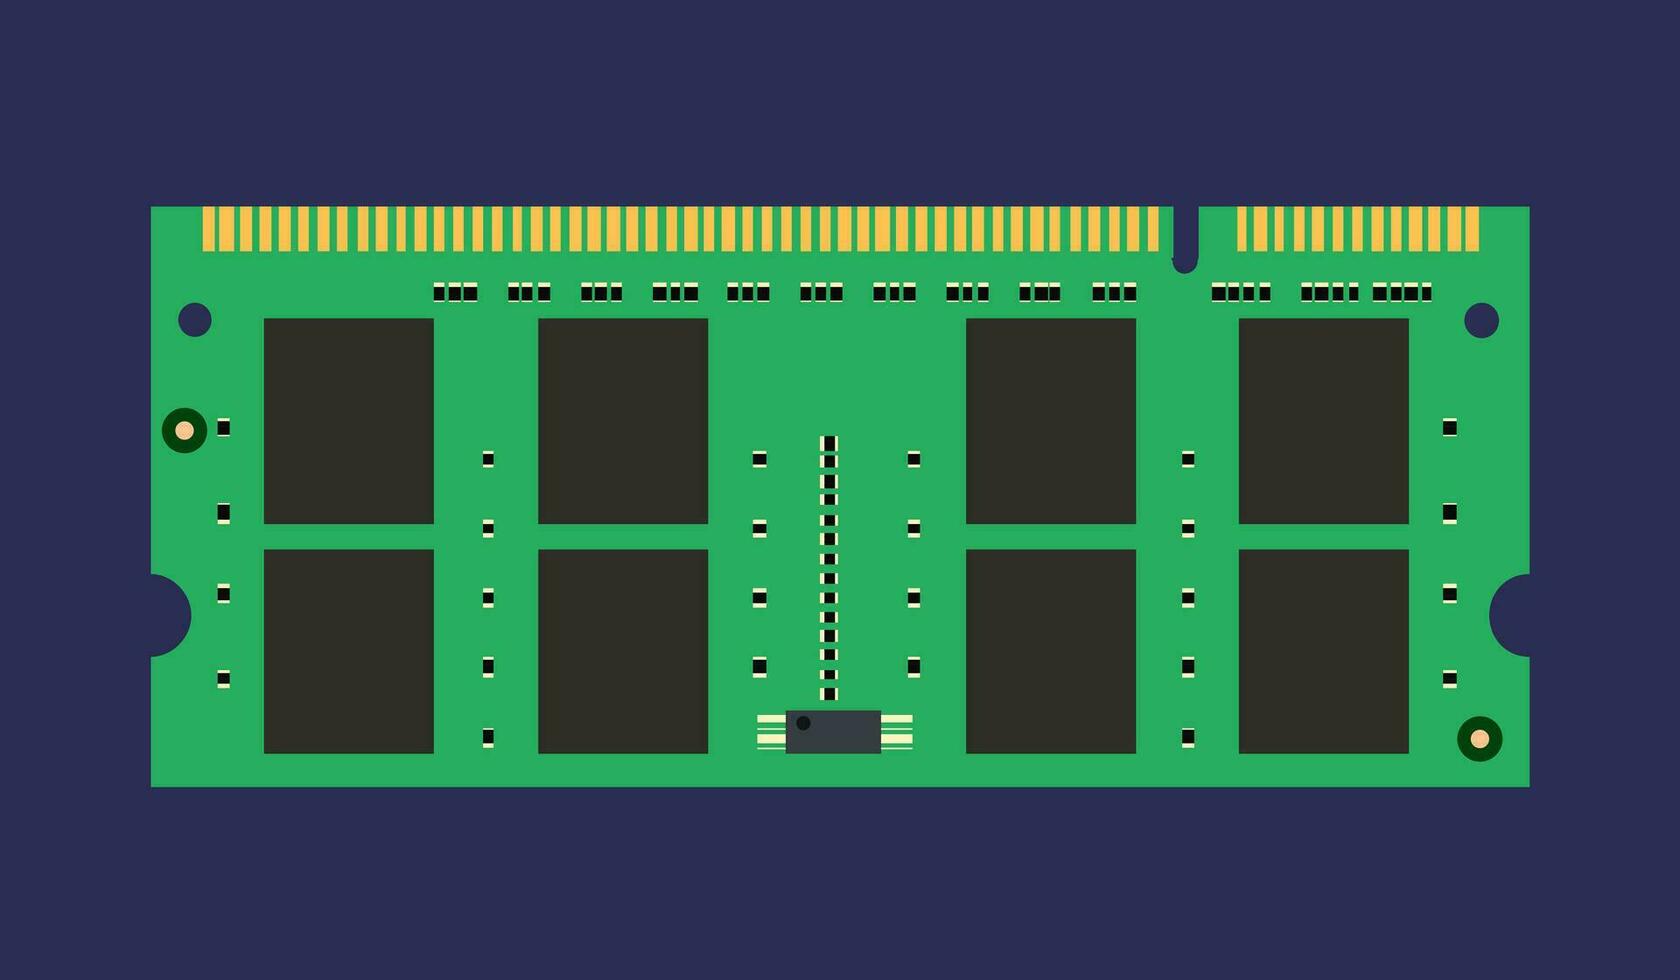 A vector illustration of a computer memory module, representing RAM Random Access Memory, on a dark background in a flat style.